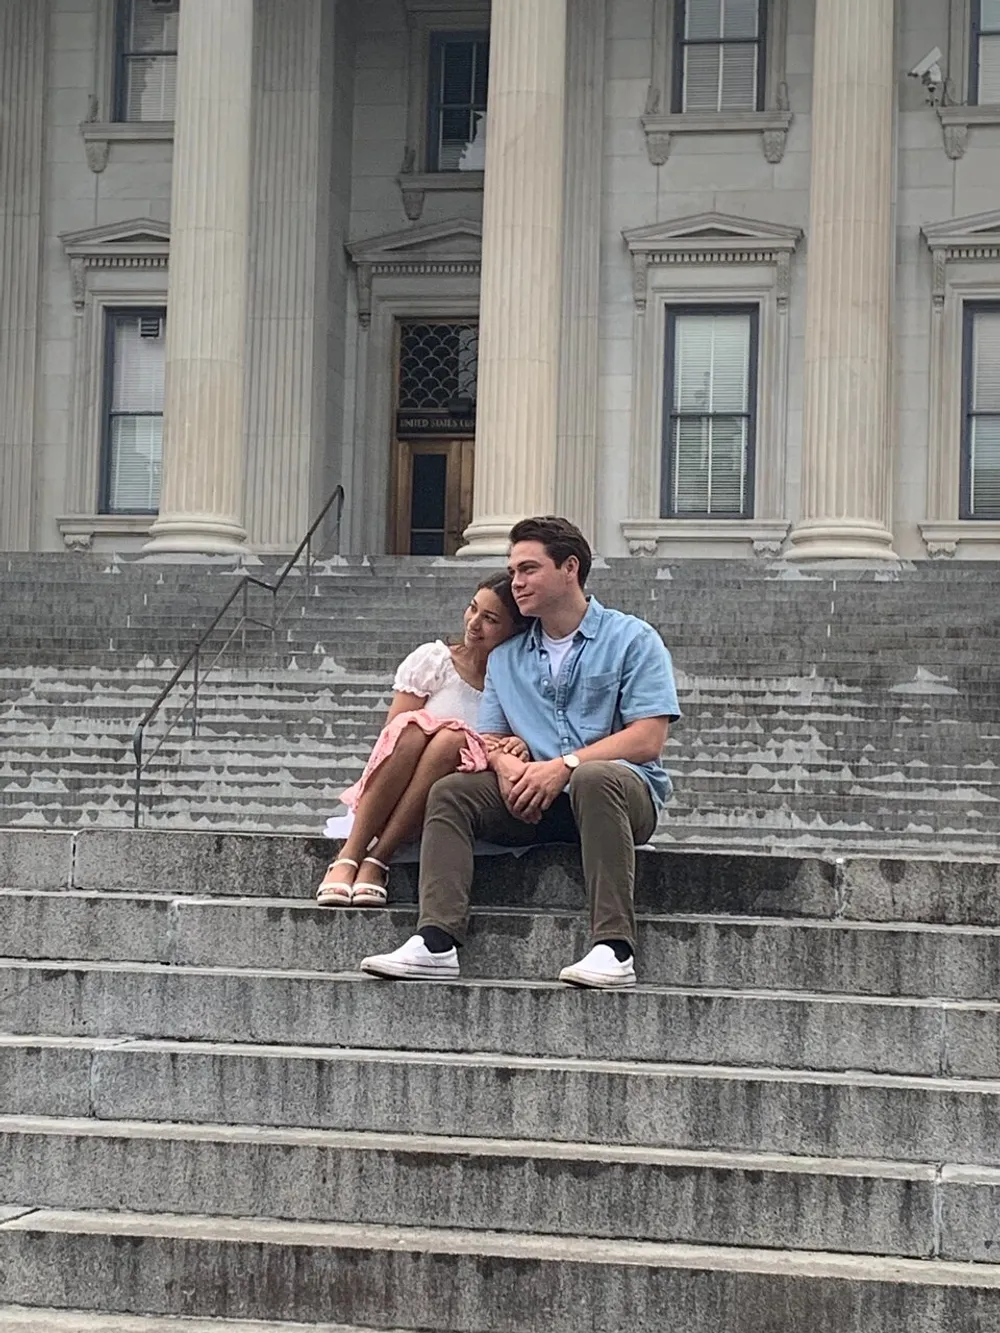 A couple is sitting closely together on the steps of a neoclassical building with one partner affectionately resting their head on the others shoulder